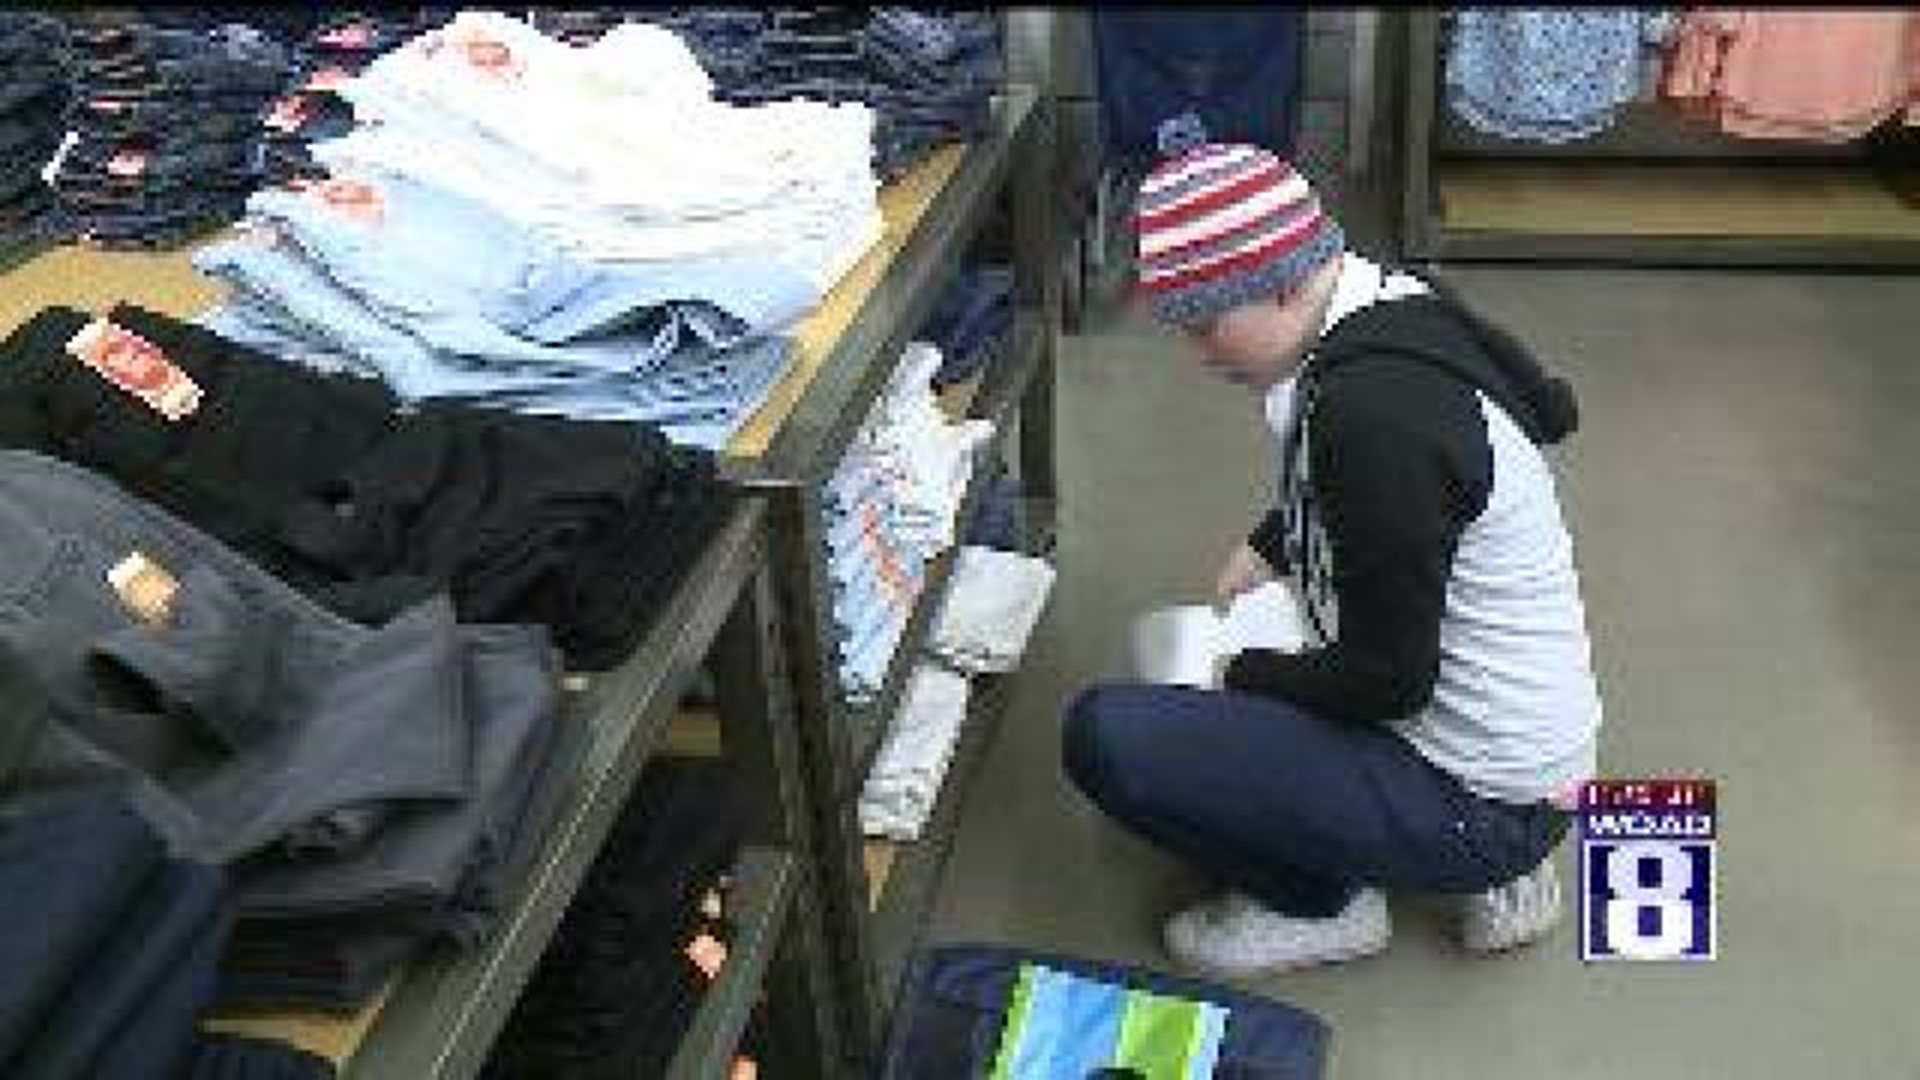 Old Navy opens early for two young cancer patients